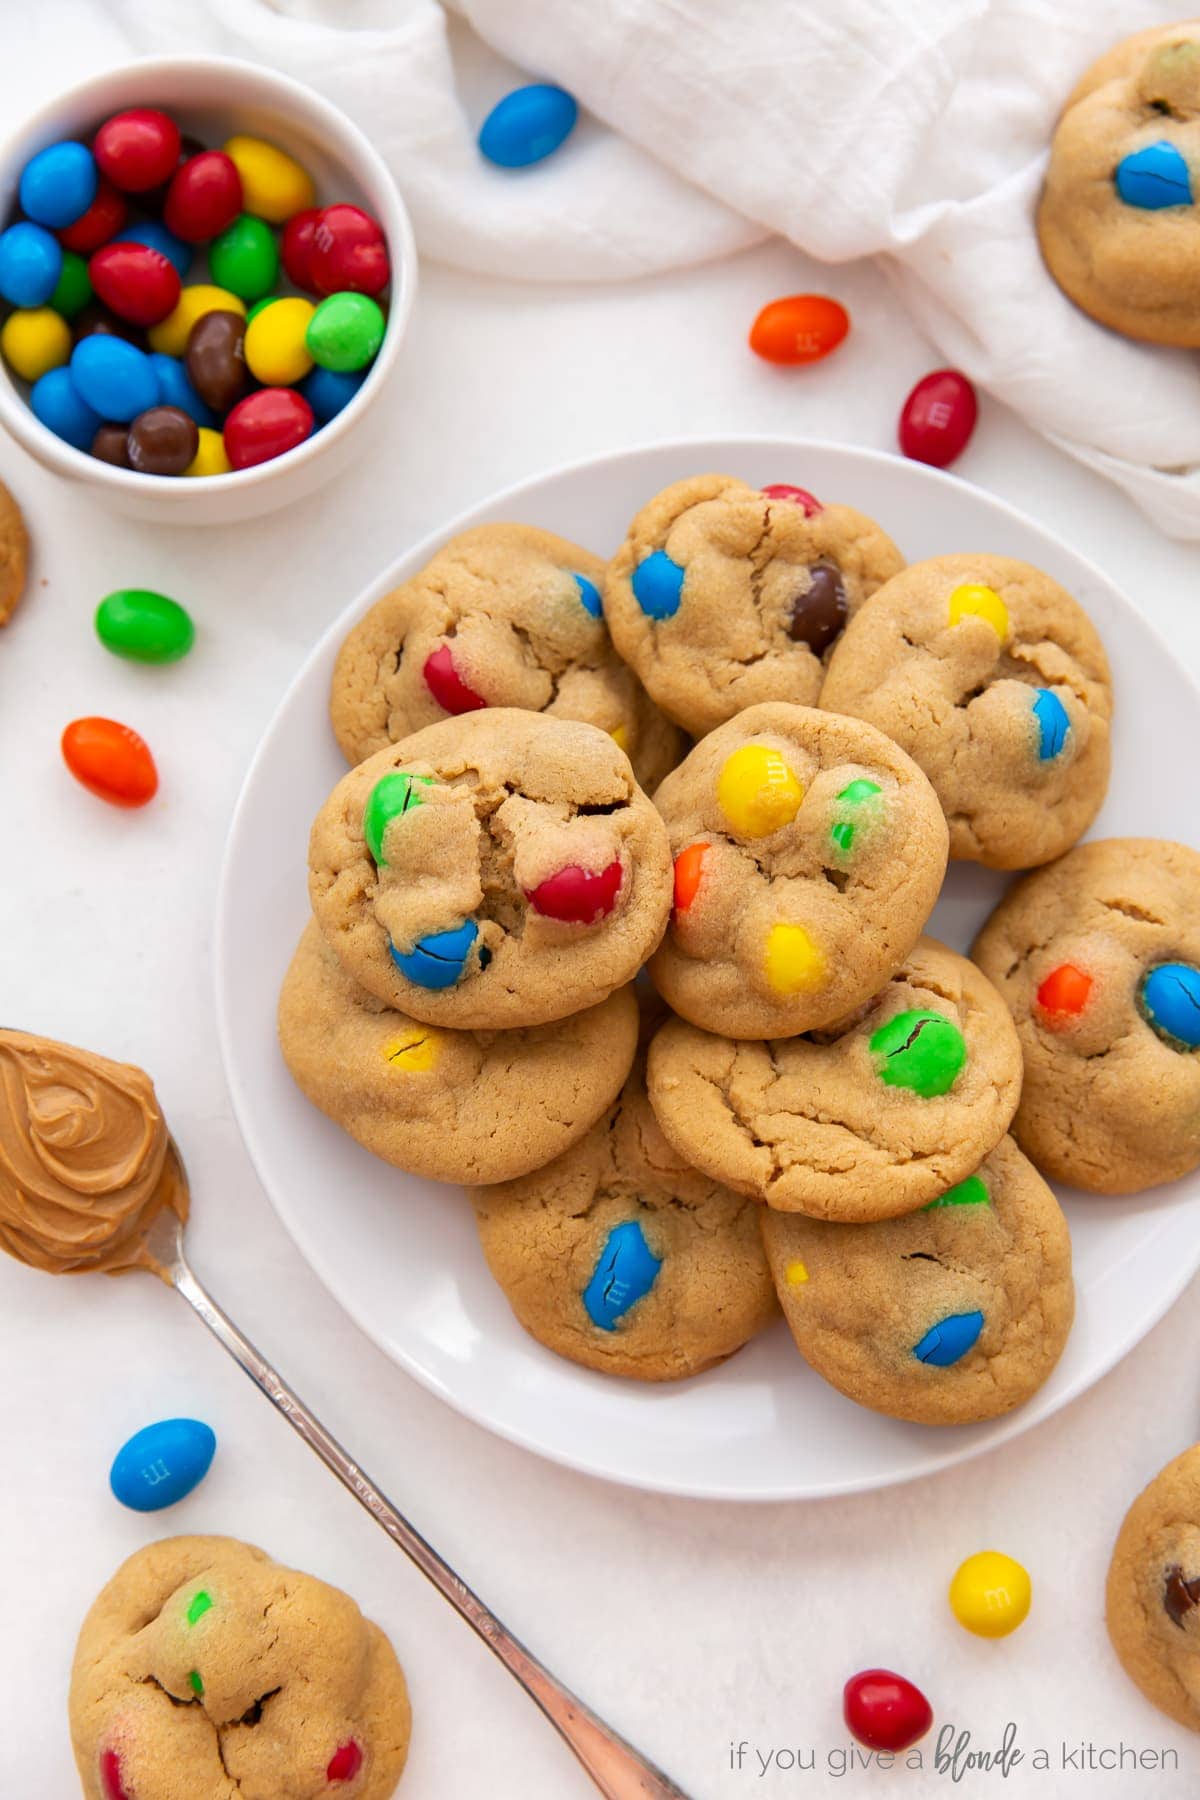 Peanut Butter M&M Cookies - SO good and easy to make!